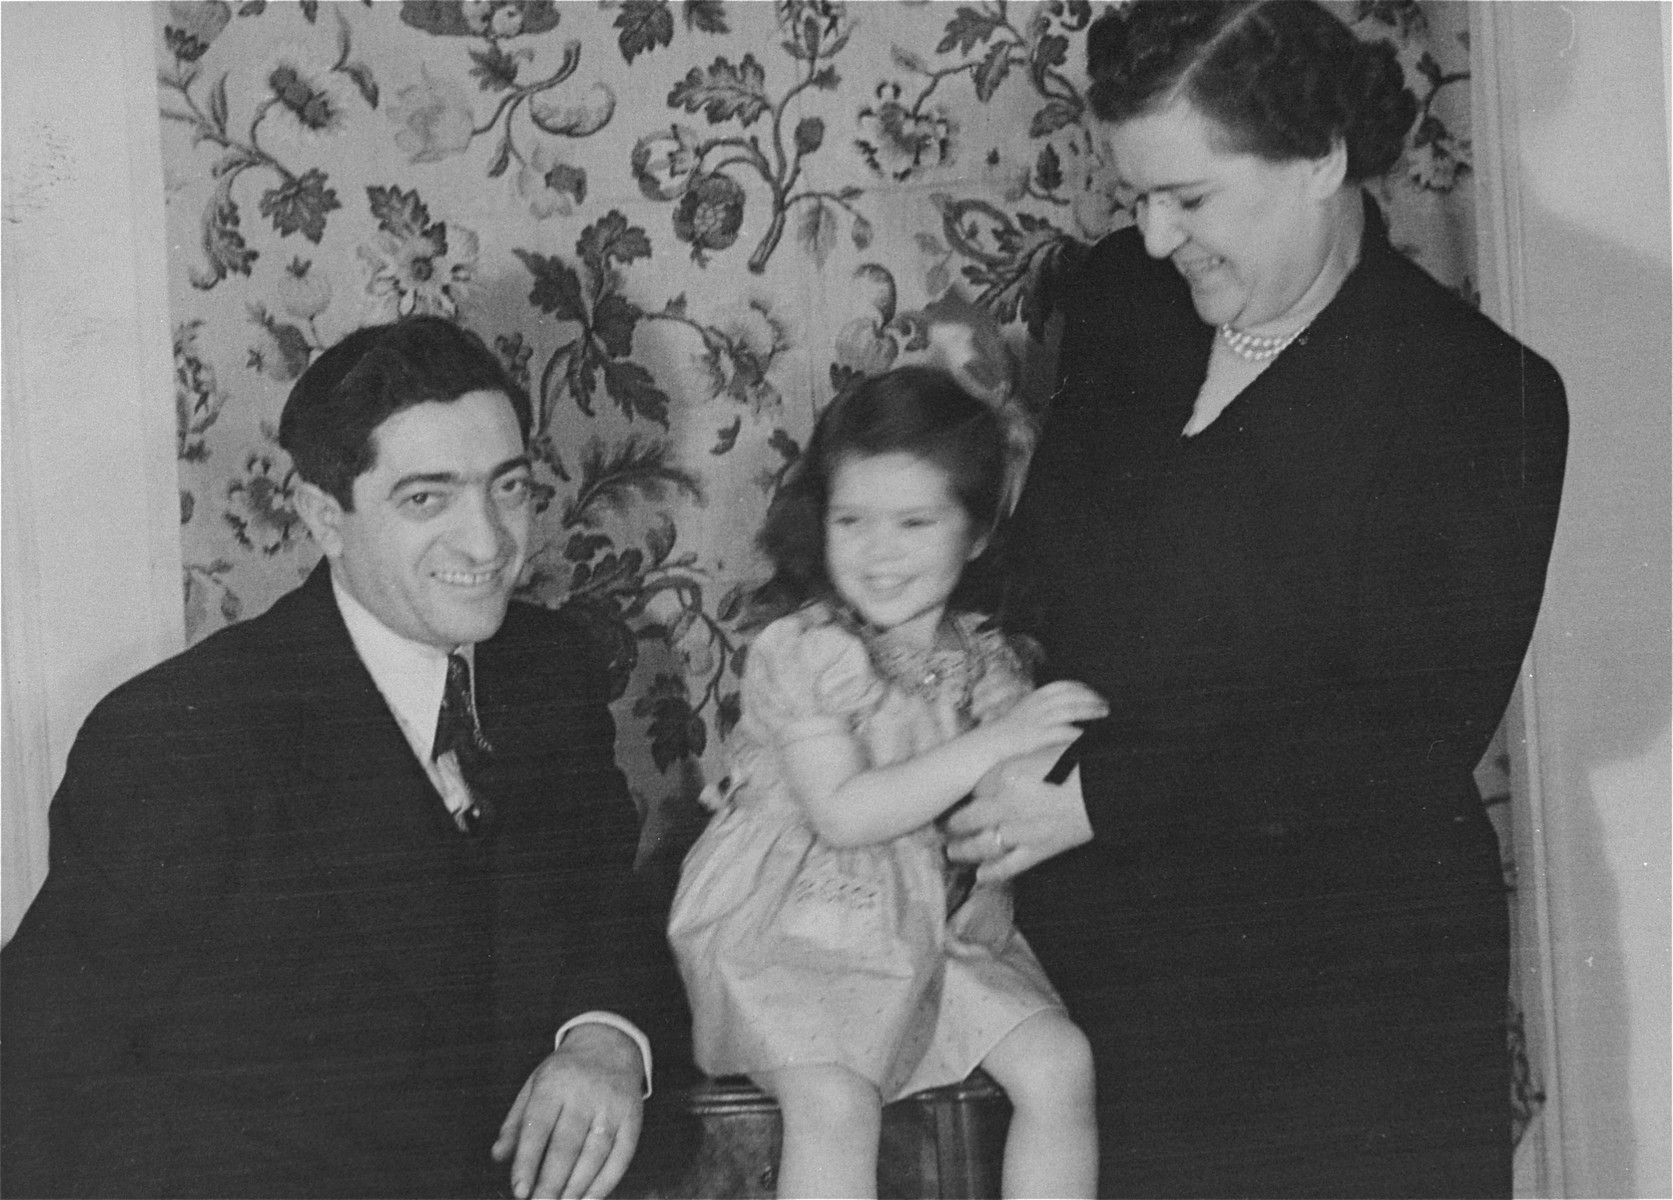 Portrait of the donor, Haviva, with her parents, Eliezer and Chaya Gar Kaplan, in their home in New York.